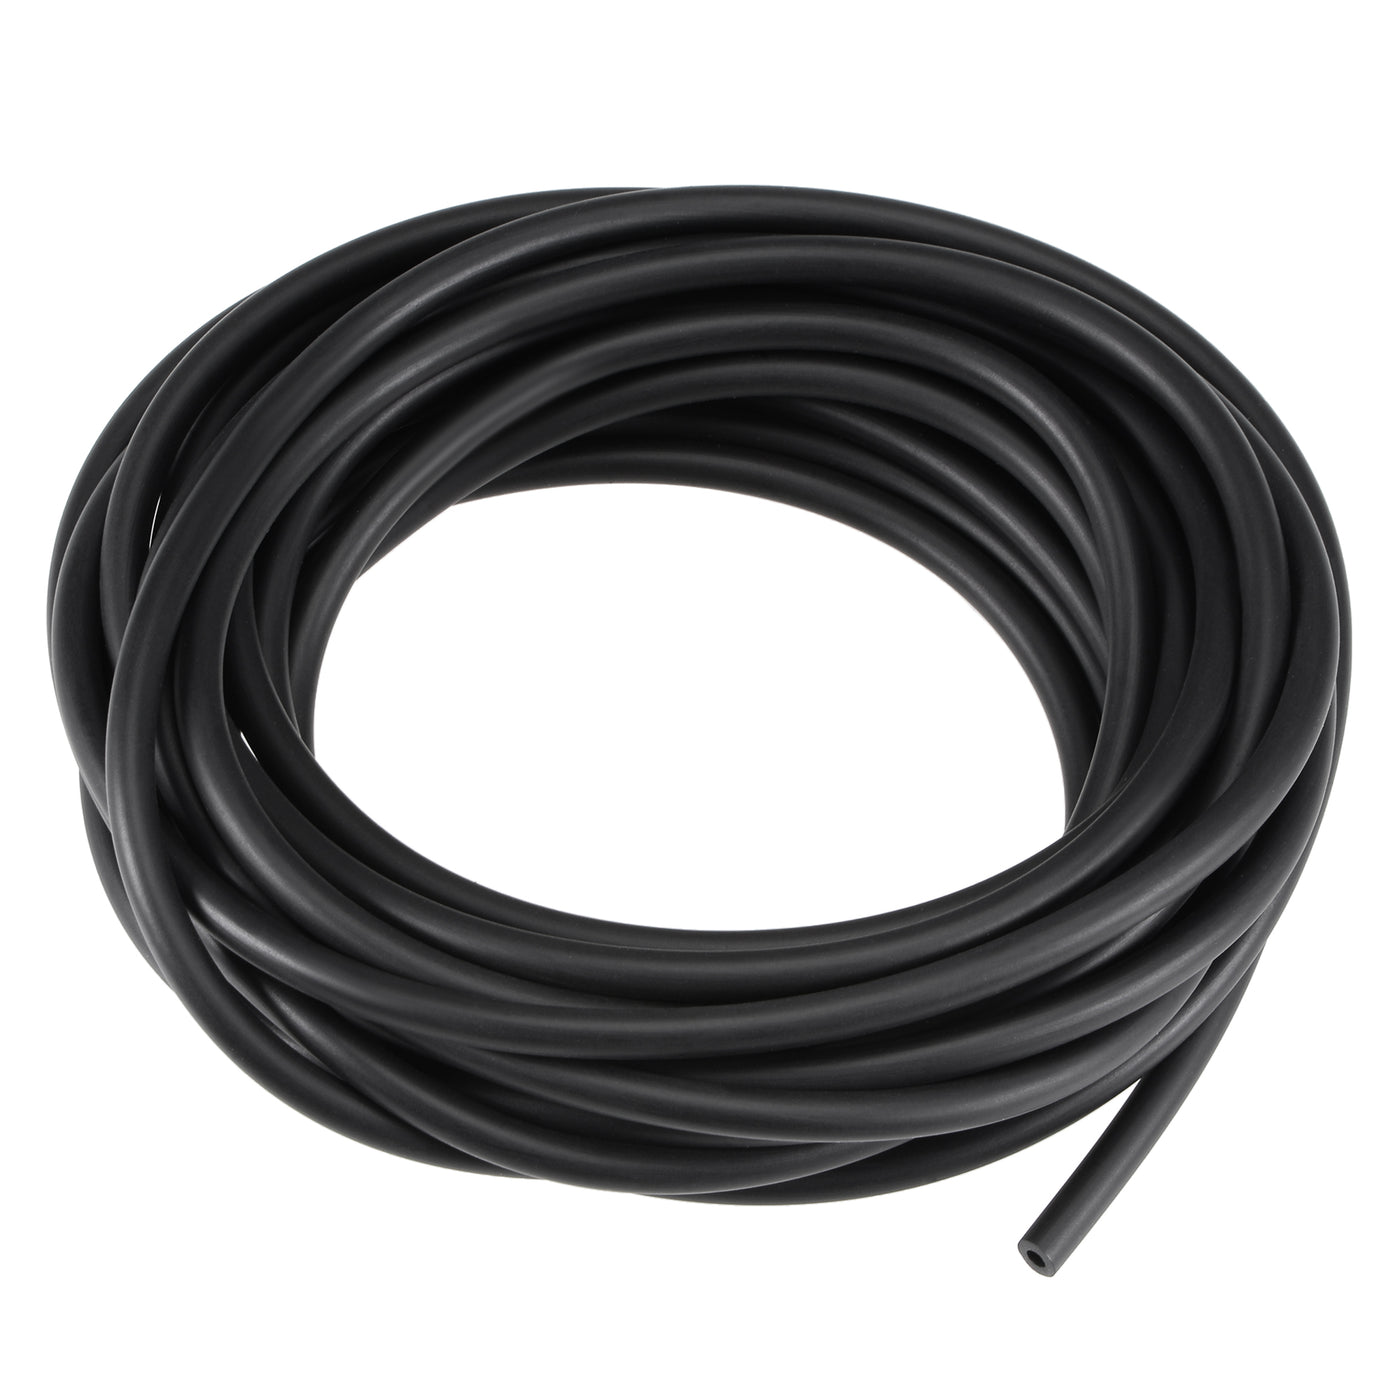 uxcell Uxcell Fuel Line Hose 2mm ID 4mm OD 16ft Oil Line & Fuel Pipe Rubber Water Hose Black